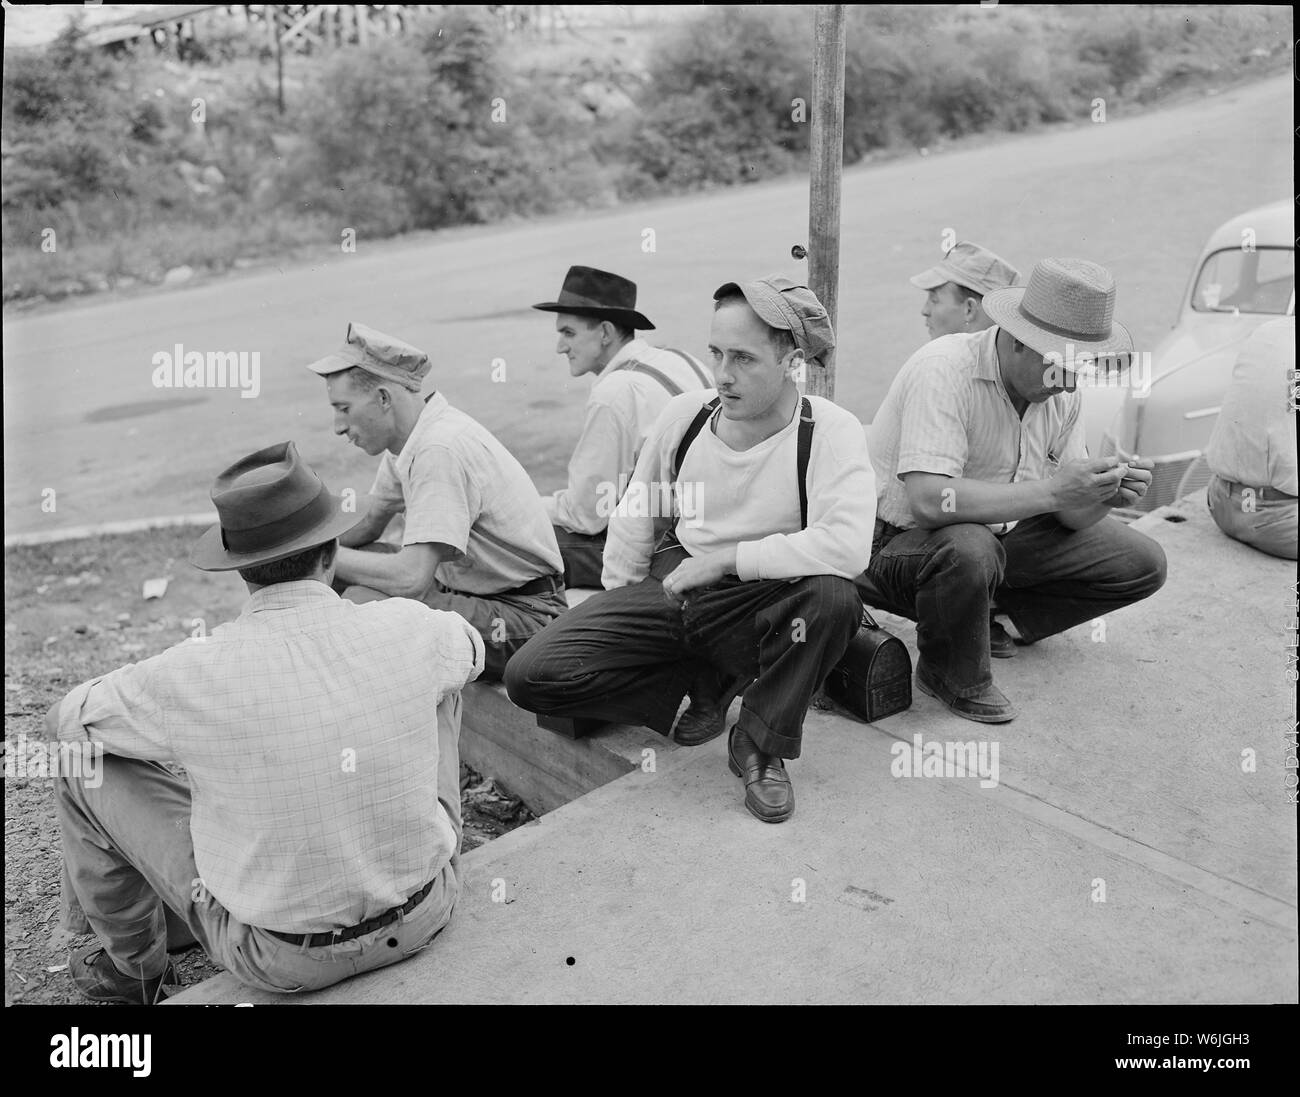 Miners waiting for the bus to take them to Richlands after they have washed up at the bathouse. Jewell Ridge Coal Company, Jewell Valley Mine, Jewell Valley, Tazewell County, Virginia. Stock Photo